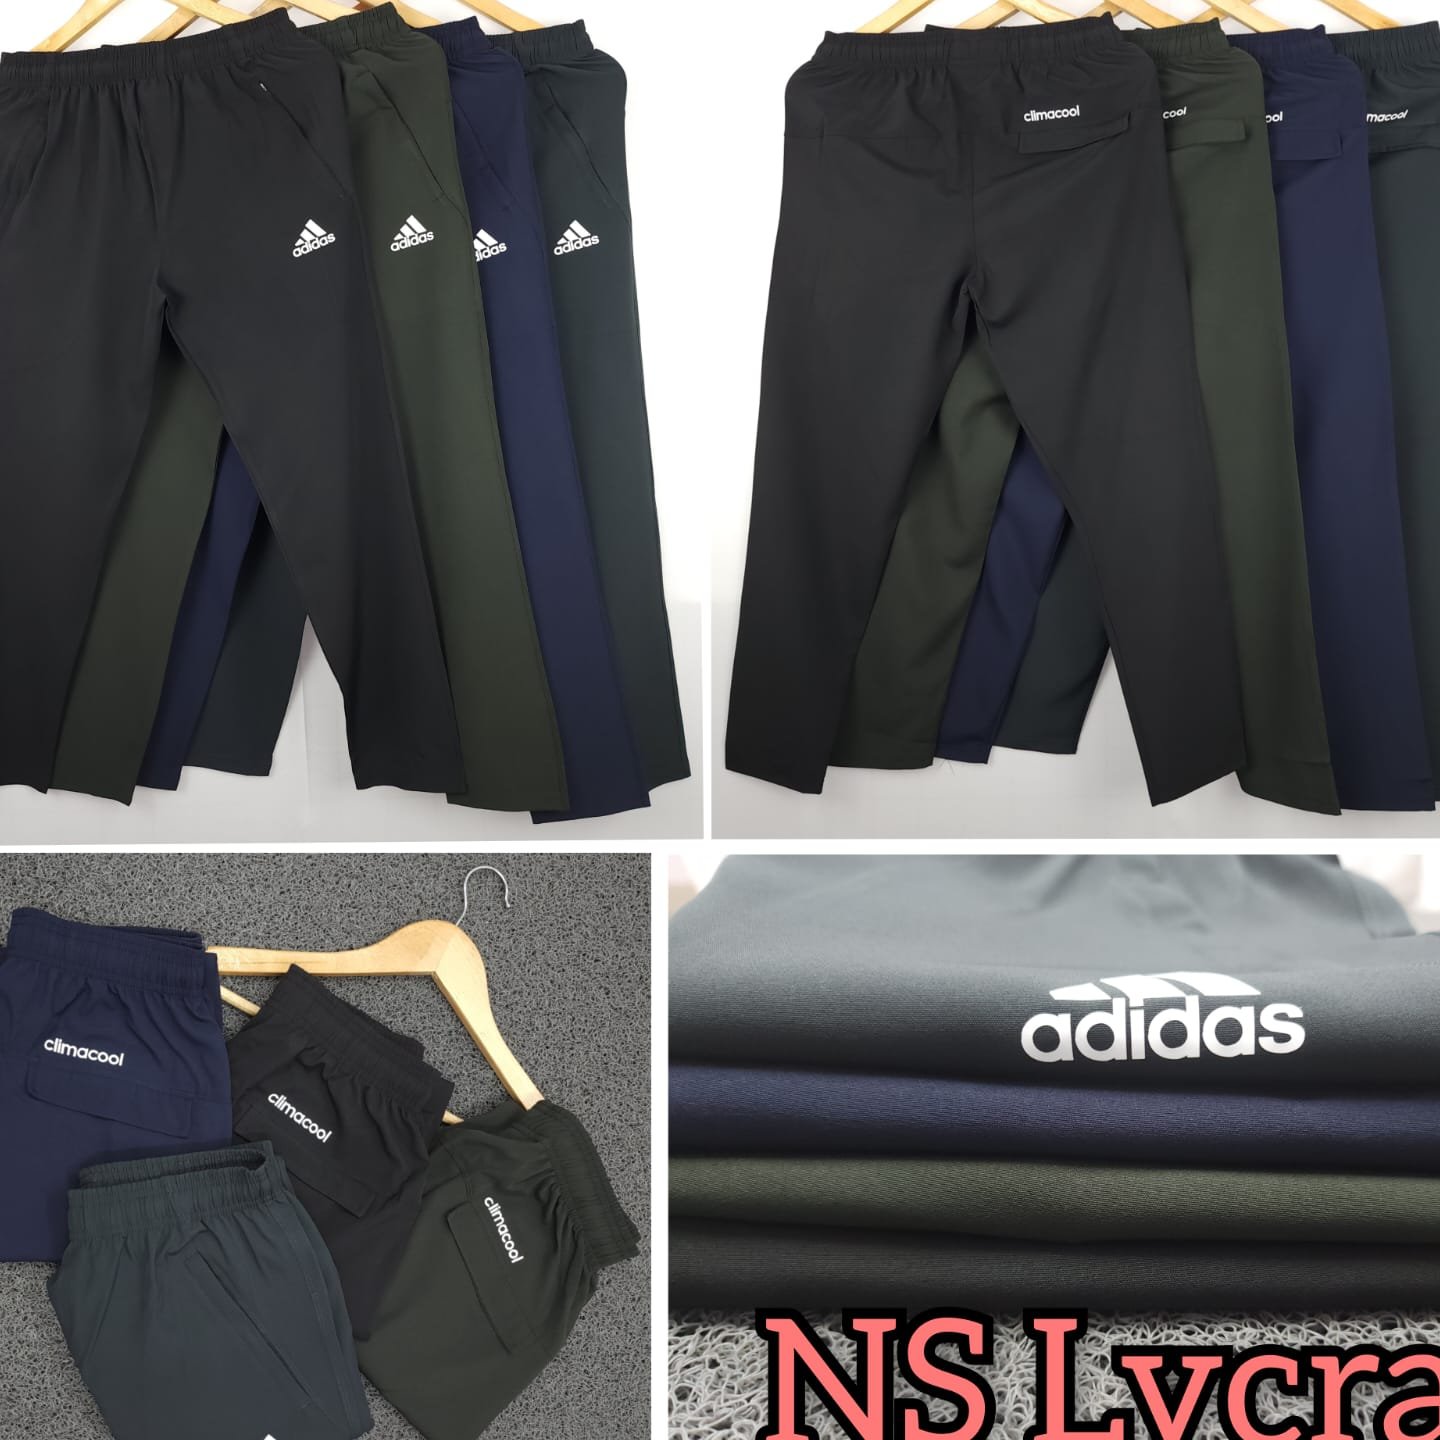 AD8504-Set Of 4 Pcs@231/Pc-Sports Imported NS lycra Fabric Designer Lower-AD8504-AN13-S02-NVB - M-1, L-1, XL-1, XXL-1, Navy Blue